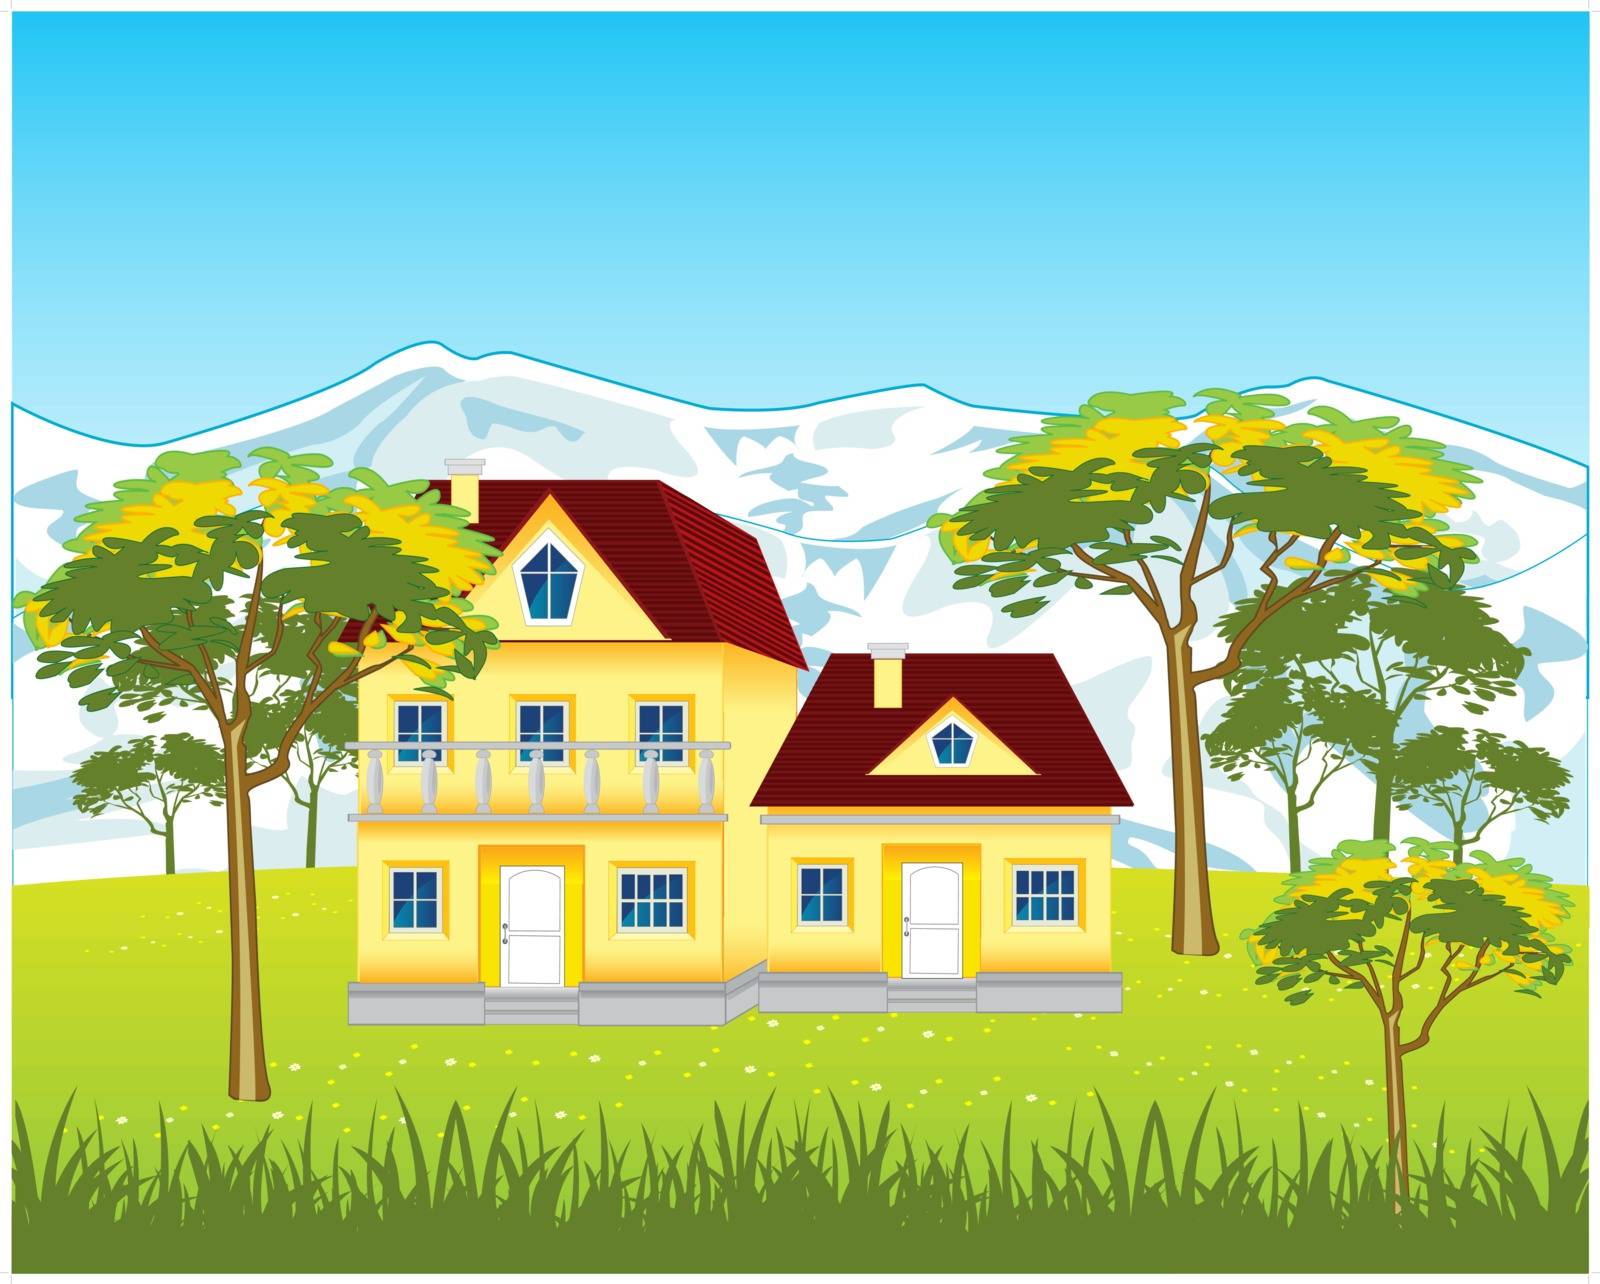 The Lodges in rural terrain on nature.Vector illustration